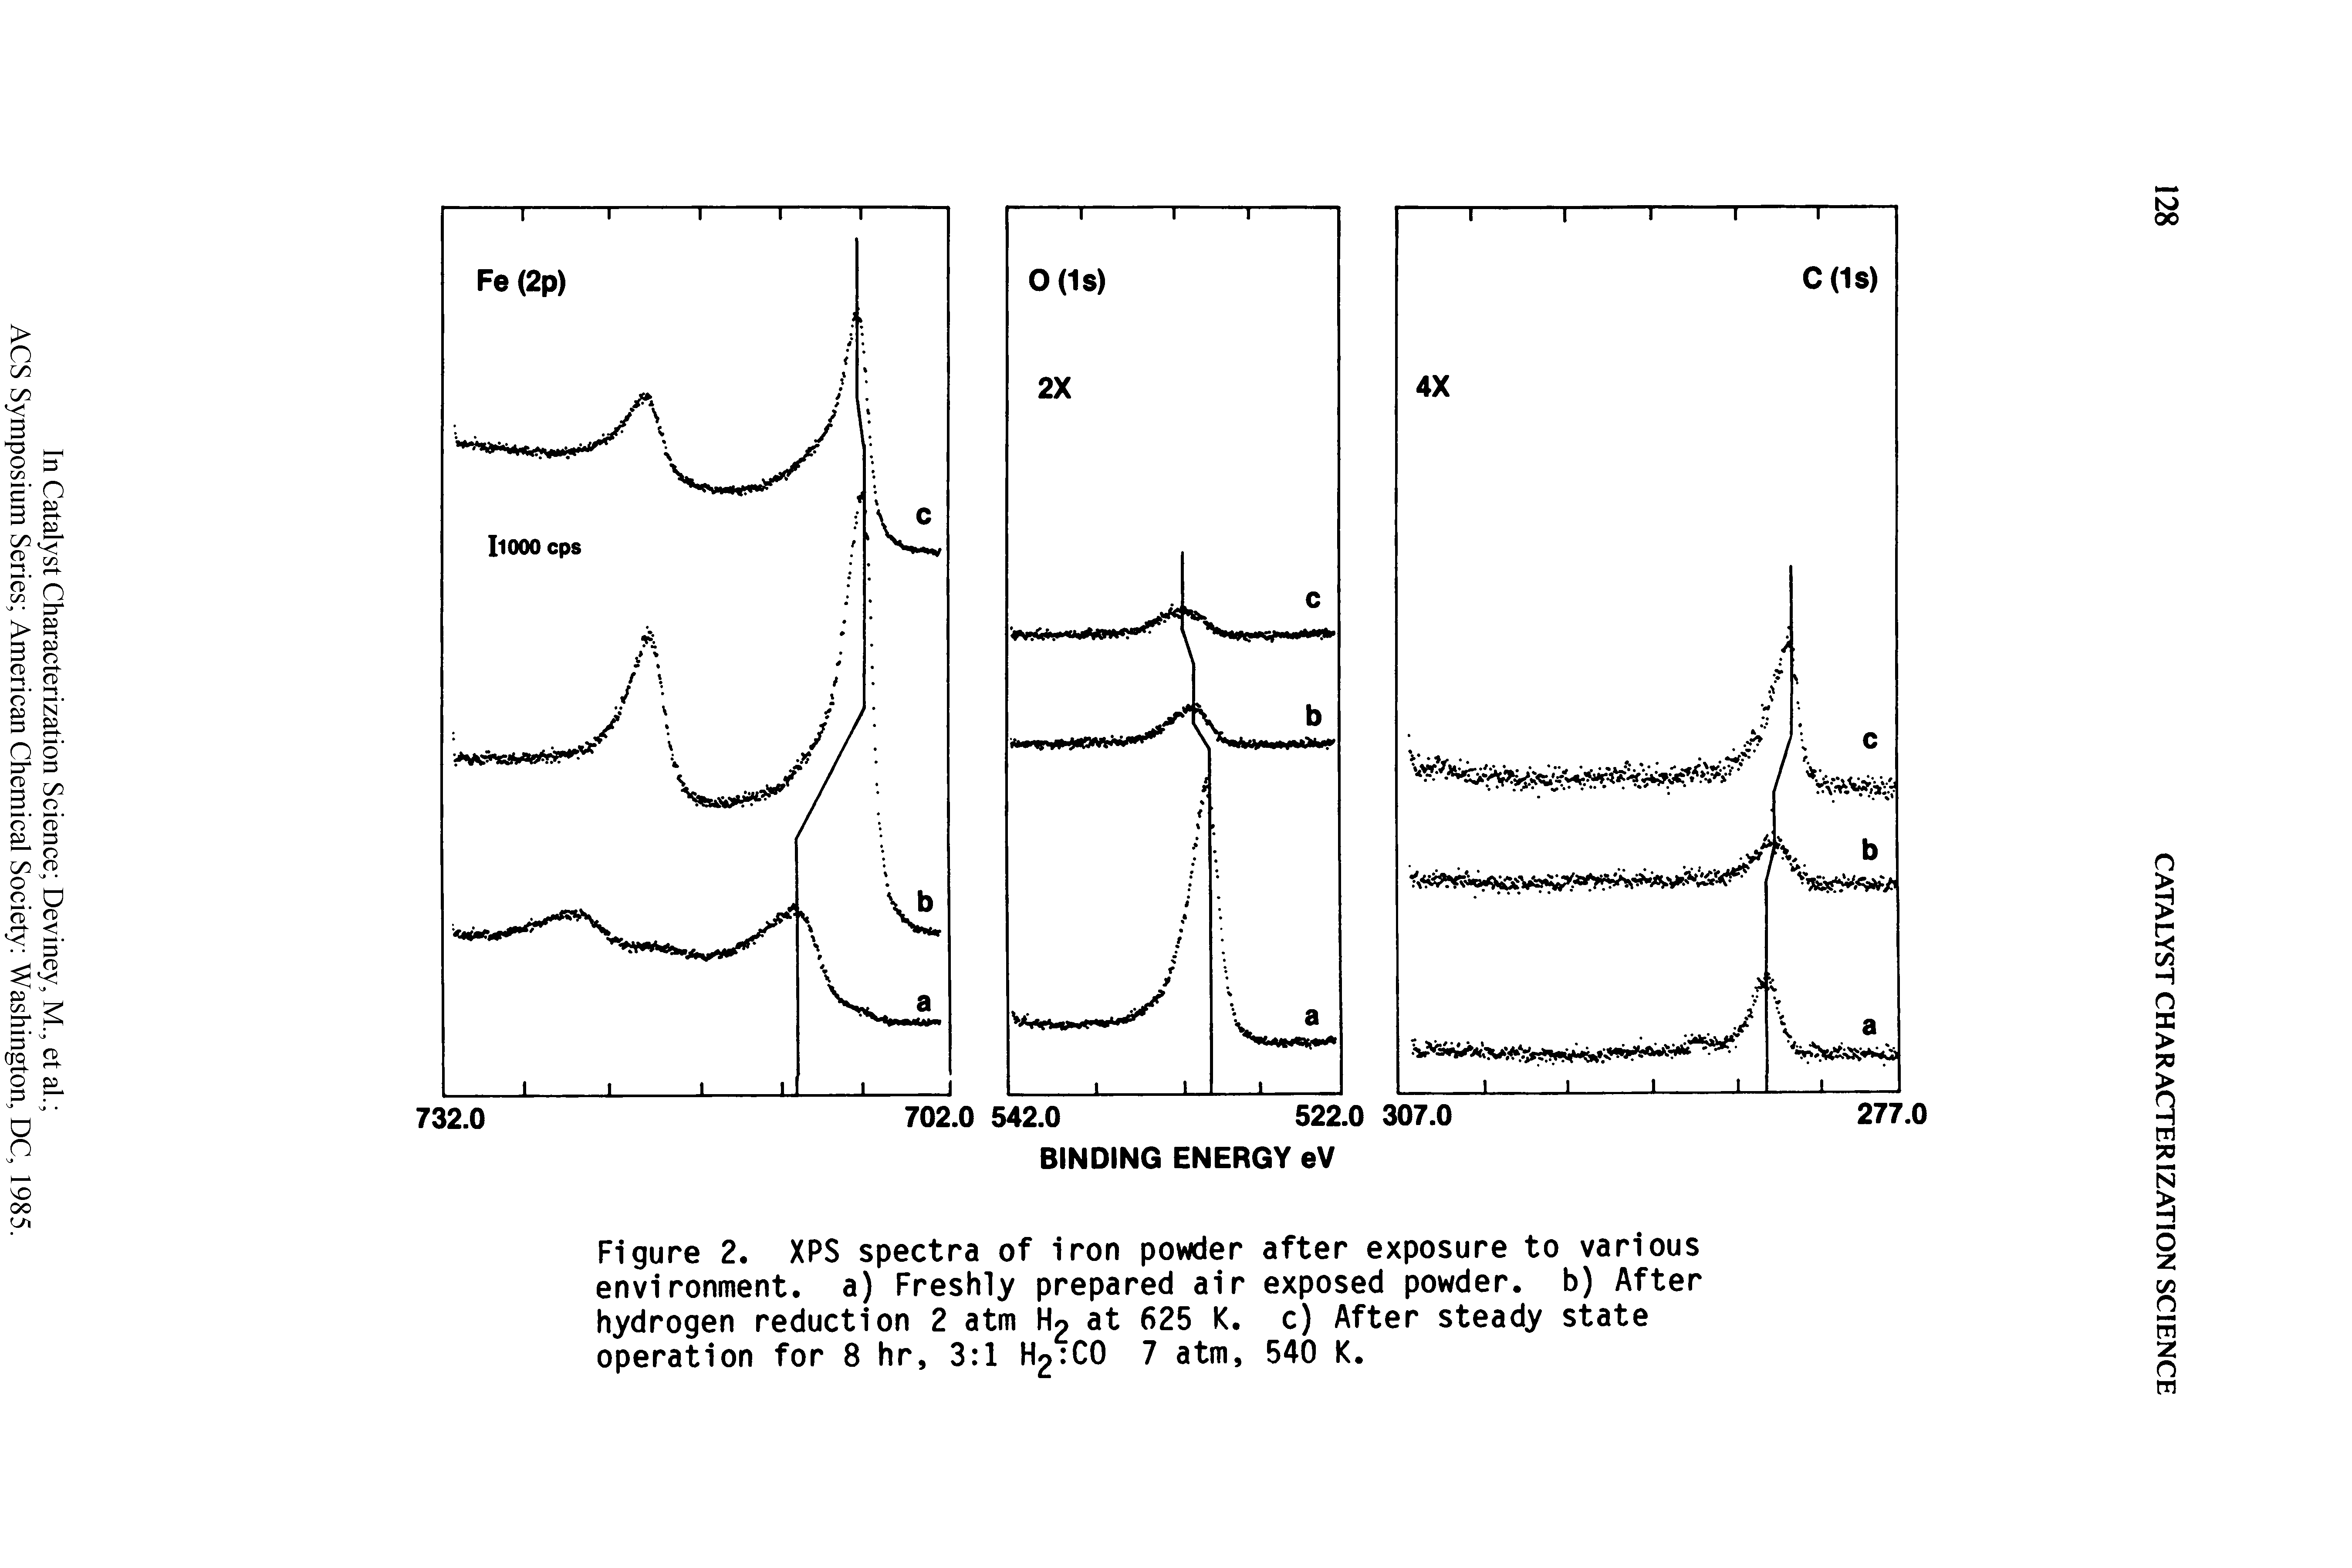 Figure 2. XPS spectra of iron powder after exposure to various environment, a) Freshly prepared air exposed powder, b) After hydrogen reduction 2 atm H2 at 625 K. c) After steady state operation for 8 hr, 3 1 H2 C0 7 atm, 540 K.